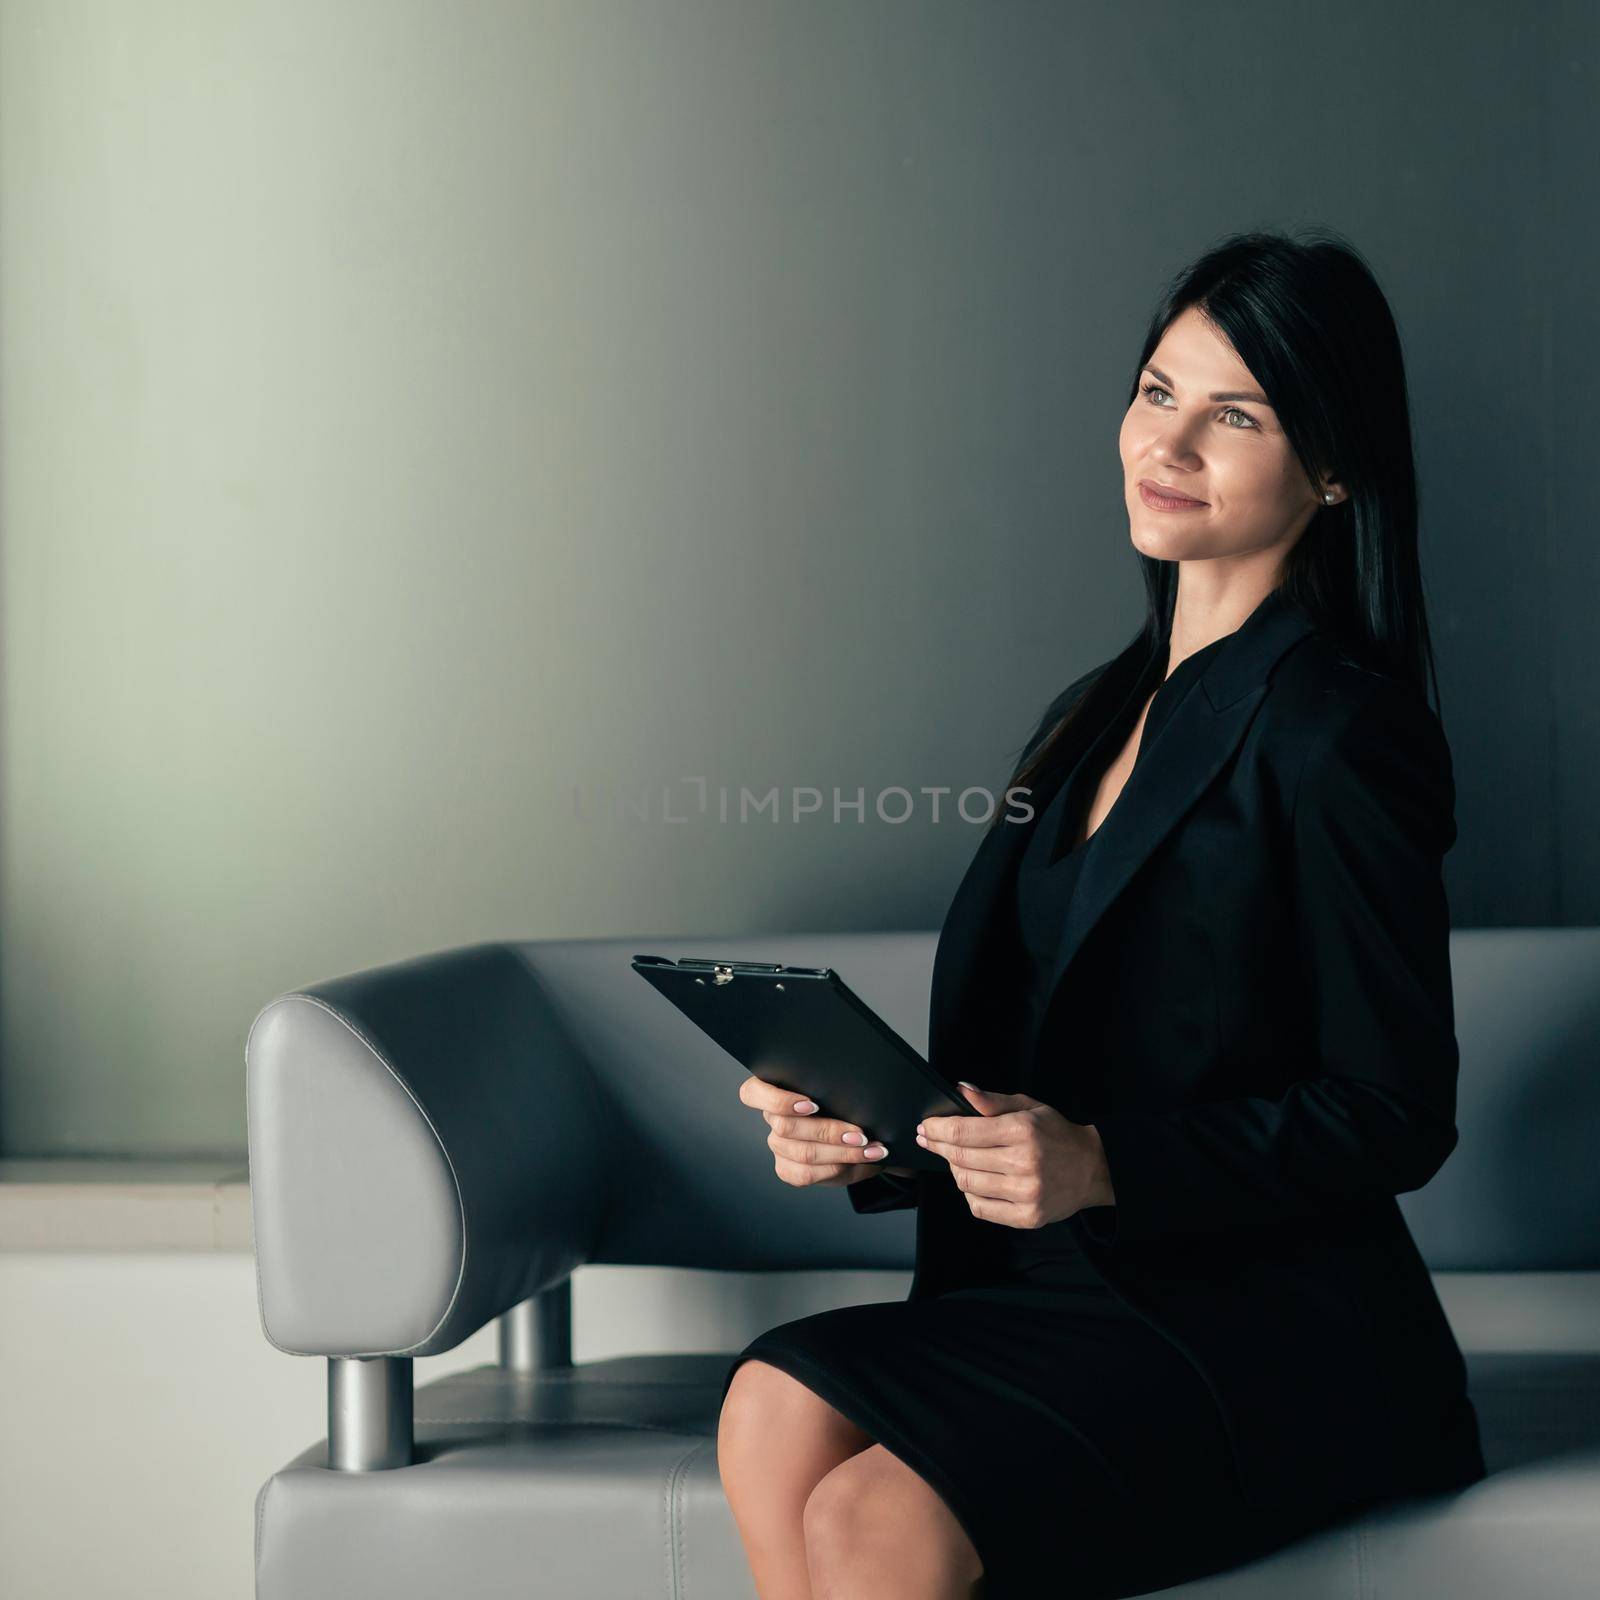 smiling business woman sitting in office lobby. photo with a copy of the space